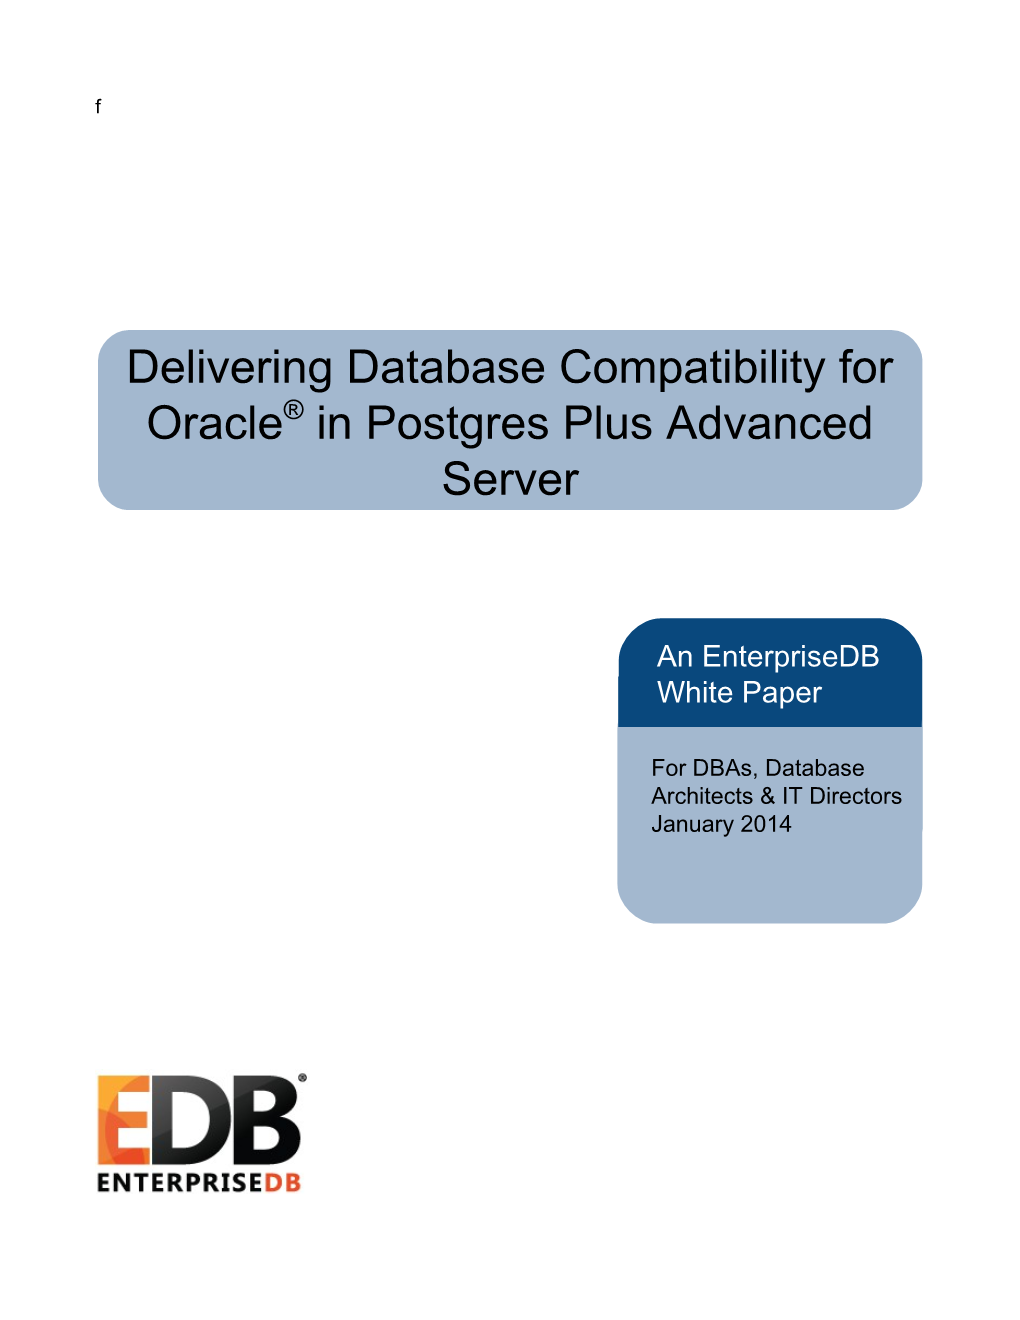 Delivering Database Compatibility for Oracle® in Postgres Plus Advanced Server